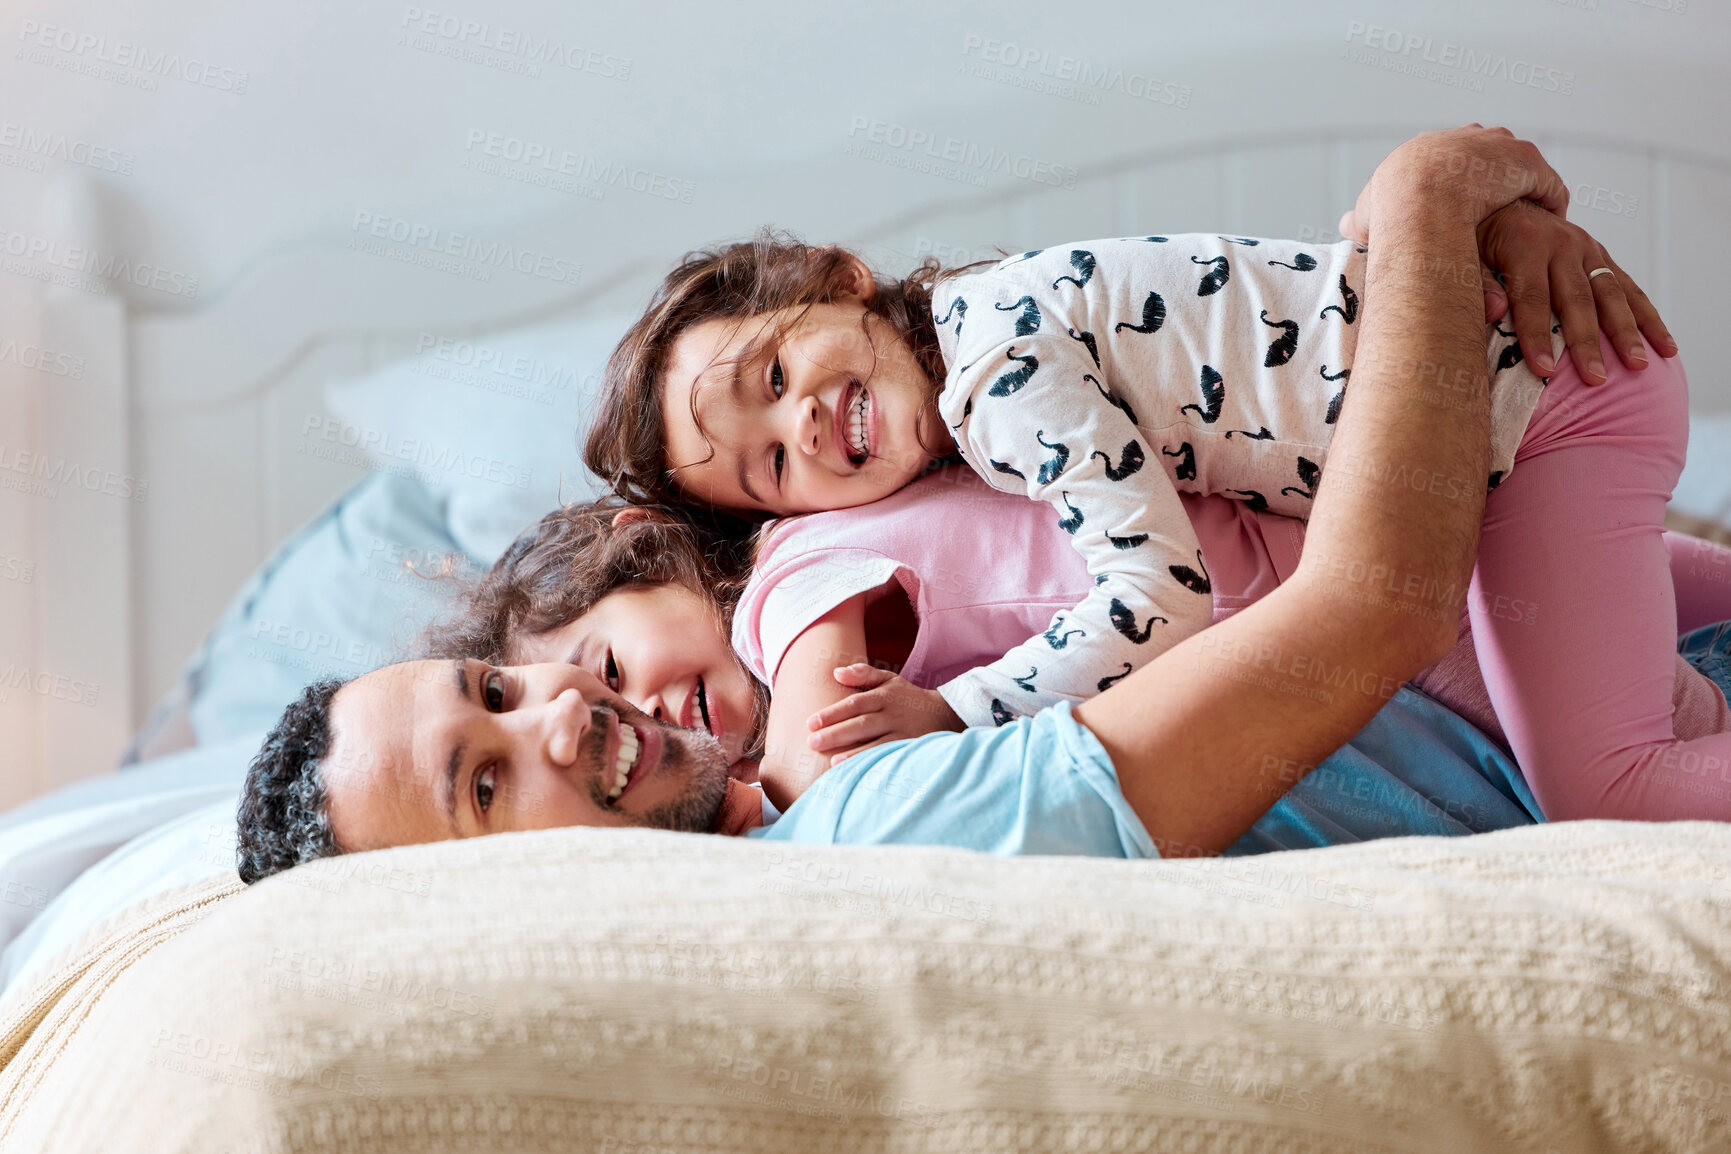 Buy stock photo Shot of two little girls lying on top of their father